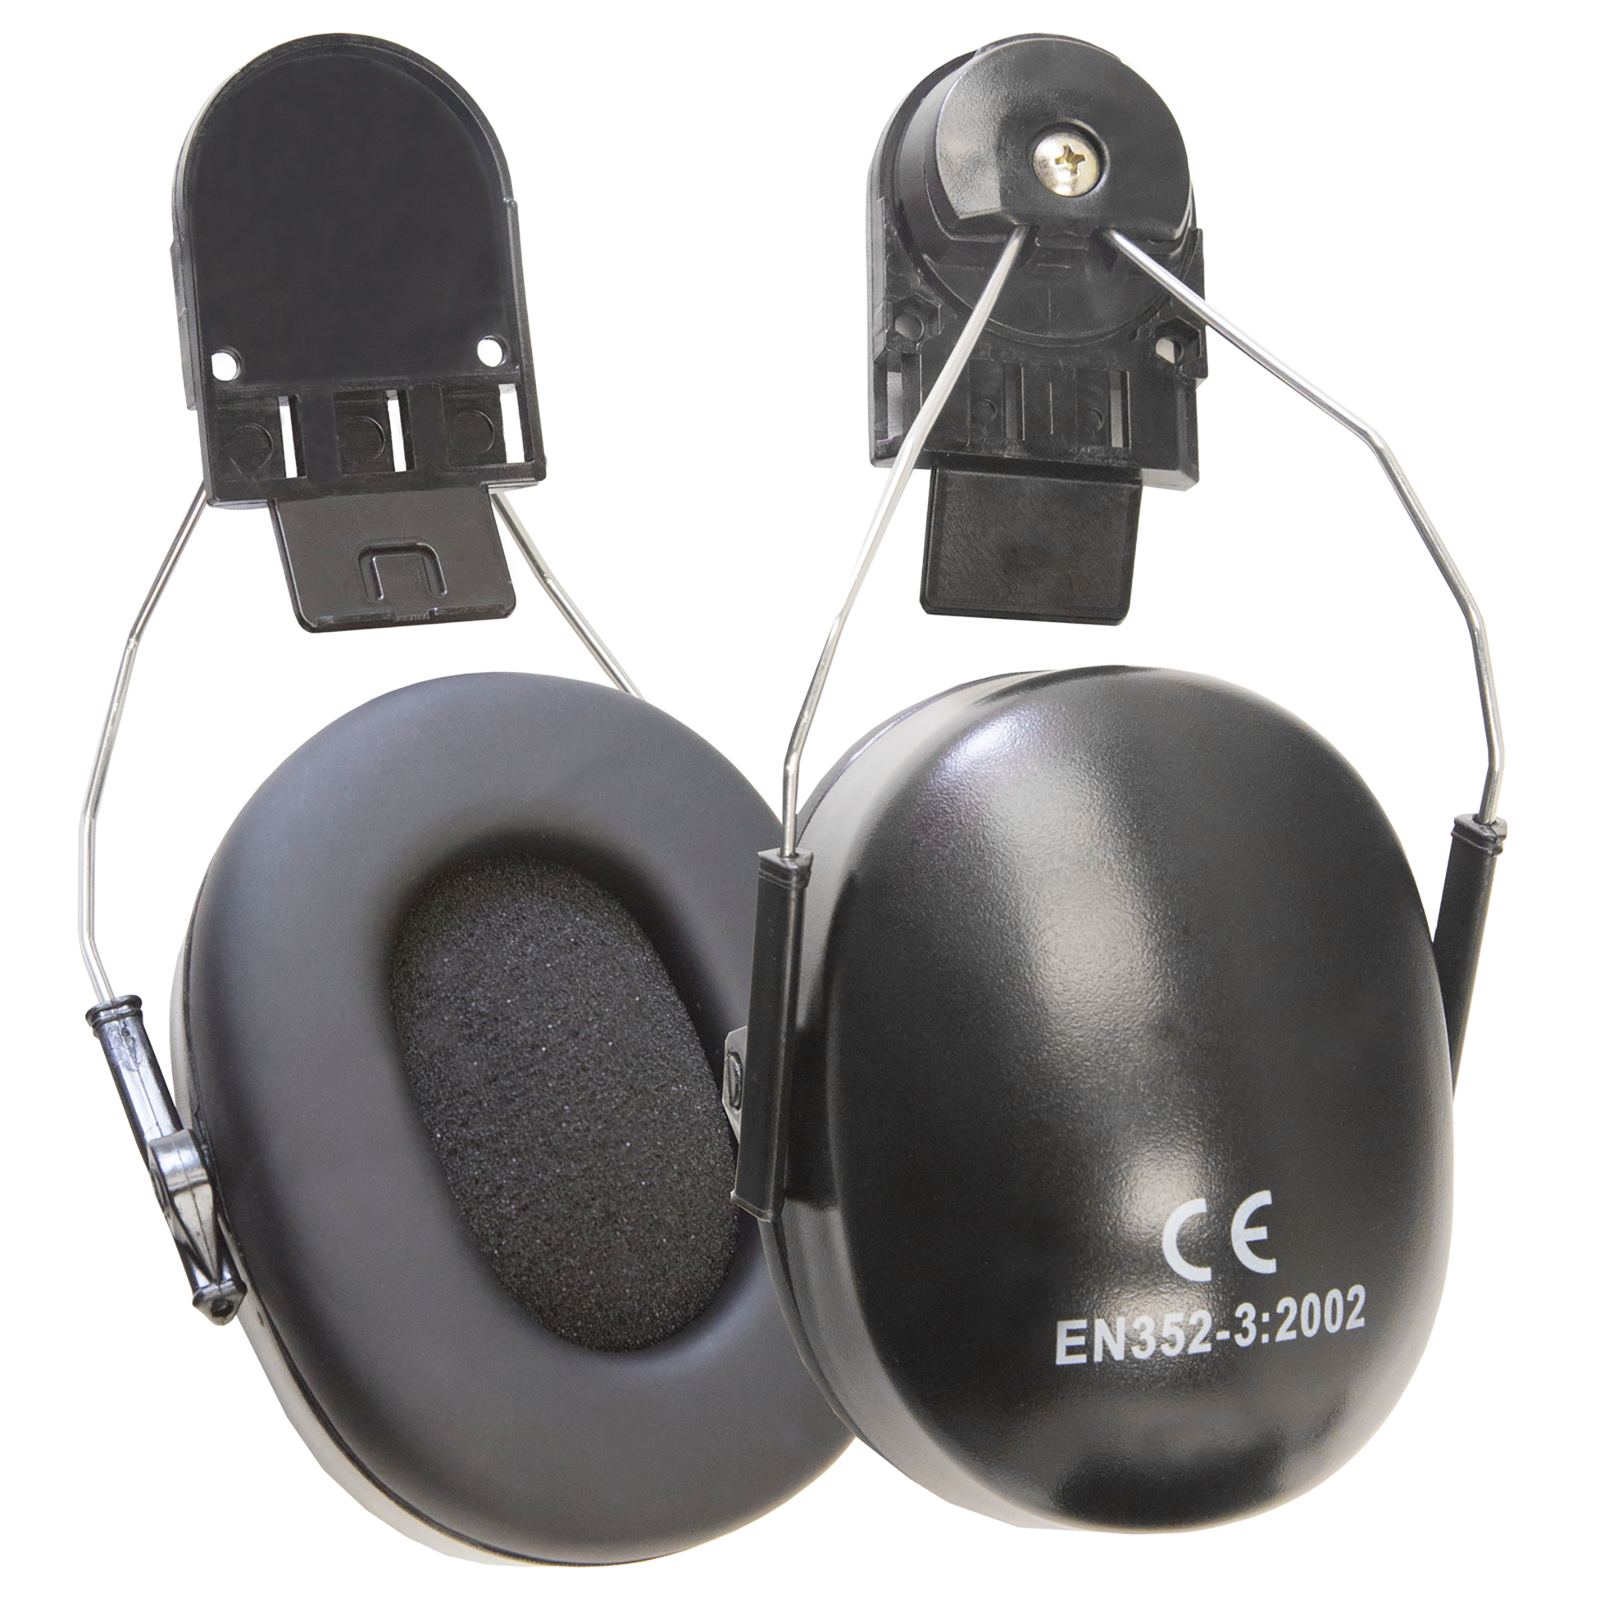 close up of the black JORESTECH padded ear muffs that are part of the hard hat and earmuff bundle